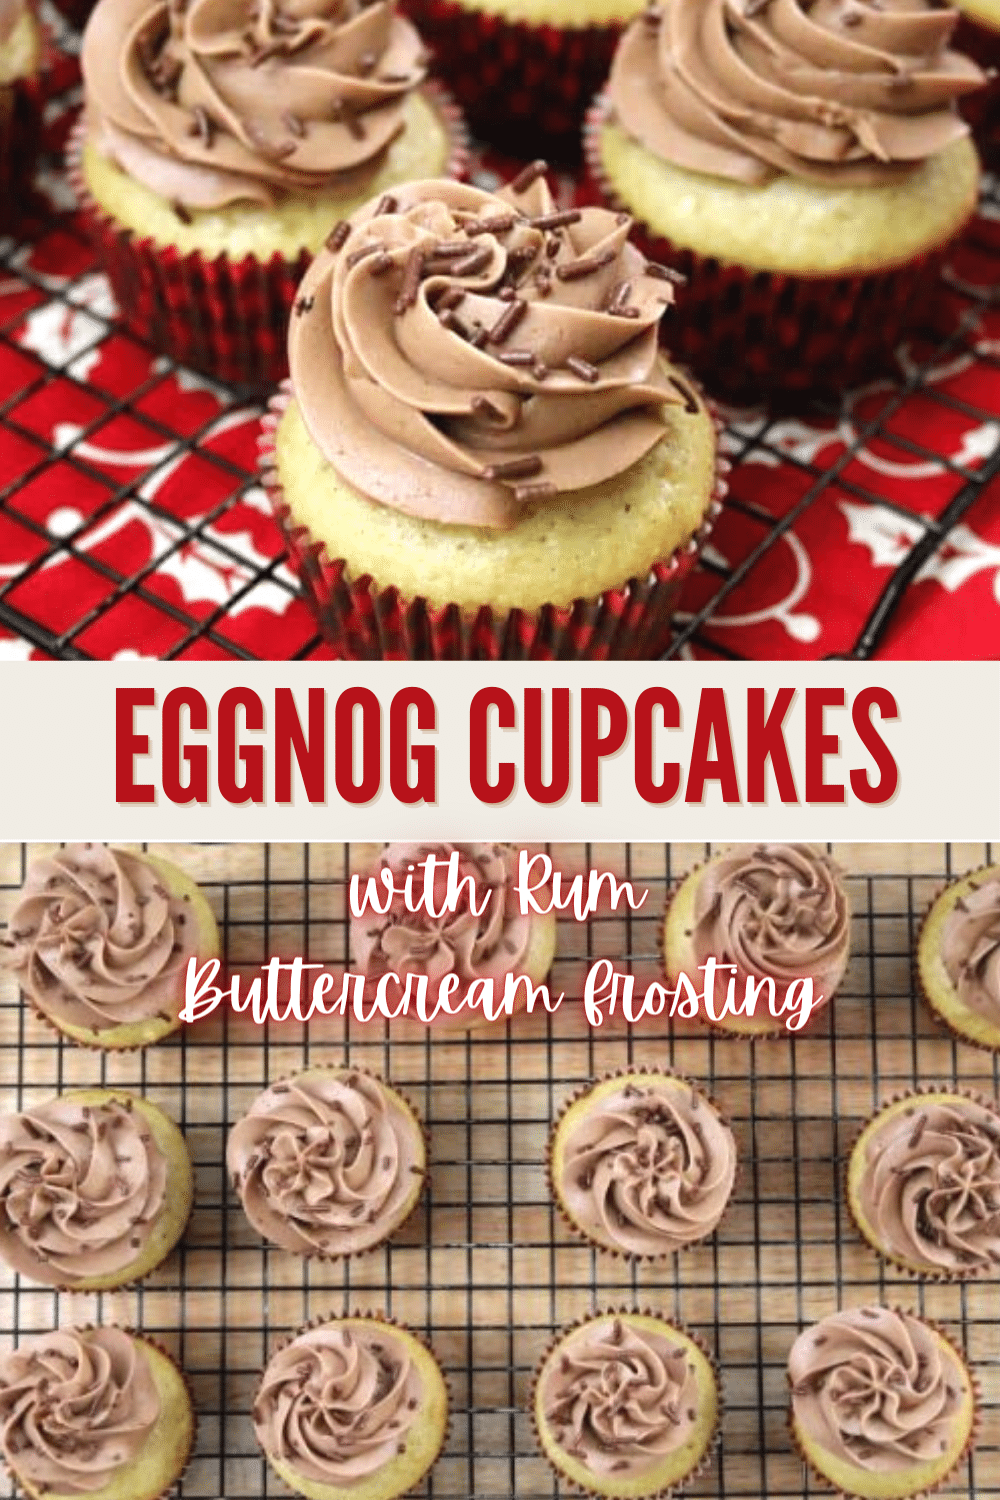 If you like eggnog, you are going to love these Eggnog Cupcakes with Rum Buttercream Frosting. You can eat your calories, rather than drink them! #eggnog #cupcakes #rumbuttercreamfrosting #christmas via @wondermomwannab